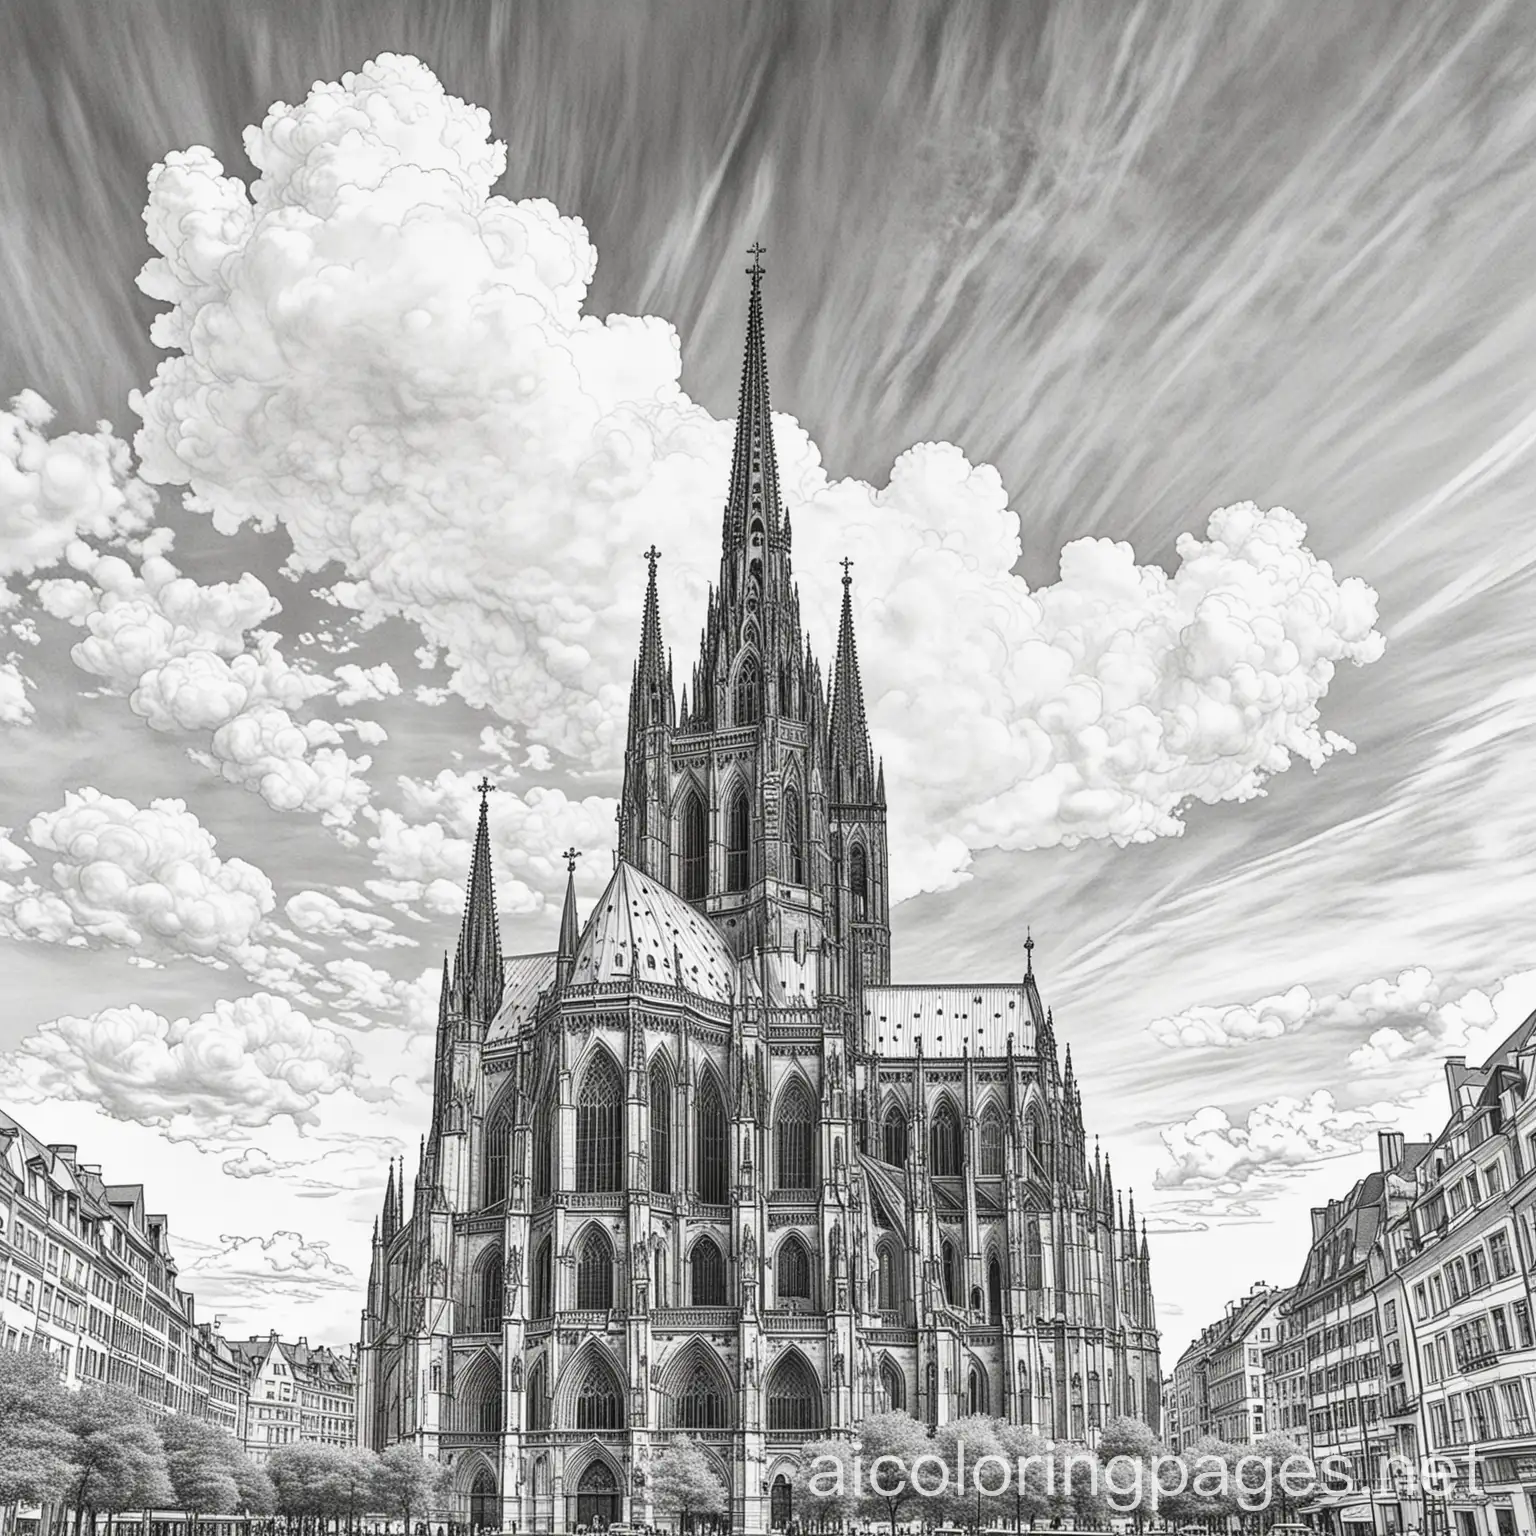 Kölner Dom mit Wolken am Himmel, Coloring Page, black and white, line art, white background, Simplicity, Ample White Space. The background of the coloring page is plain white to make it easy for young children to color within the lines. The outlines of all the subjects are easy to distinguish, making it simple for kids to color without too much difficulty